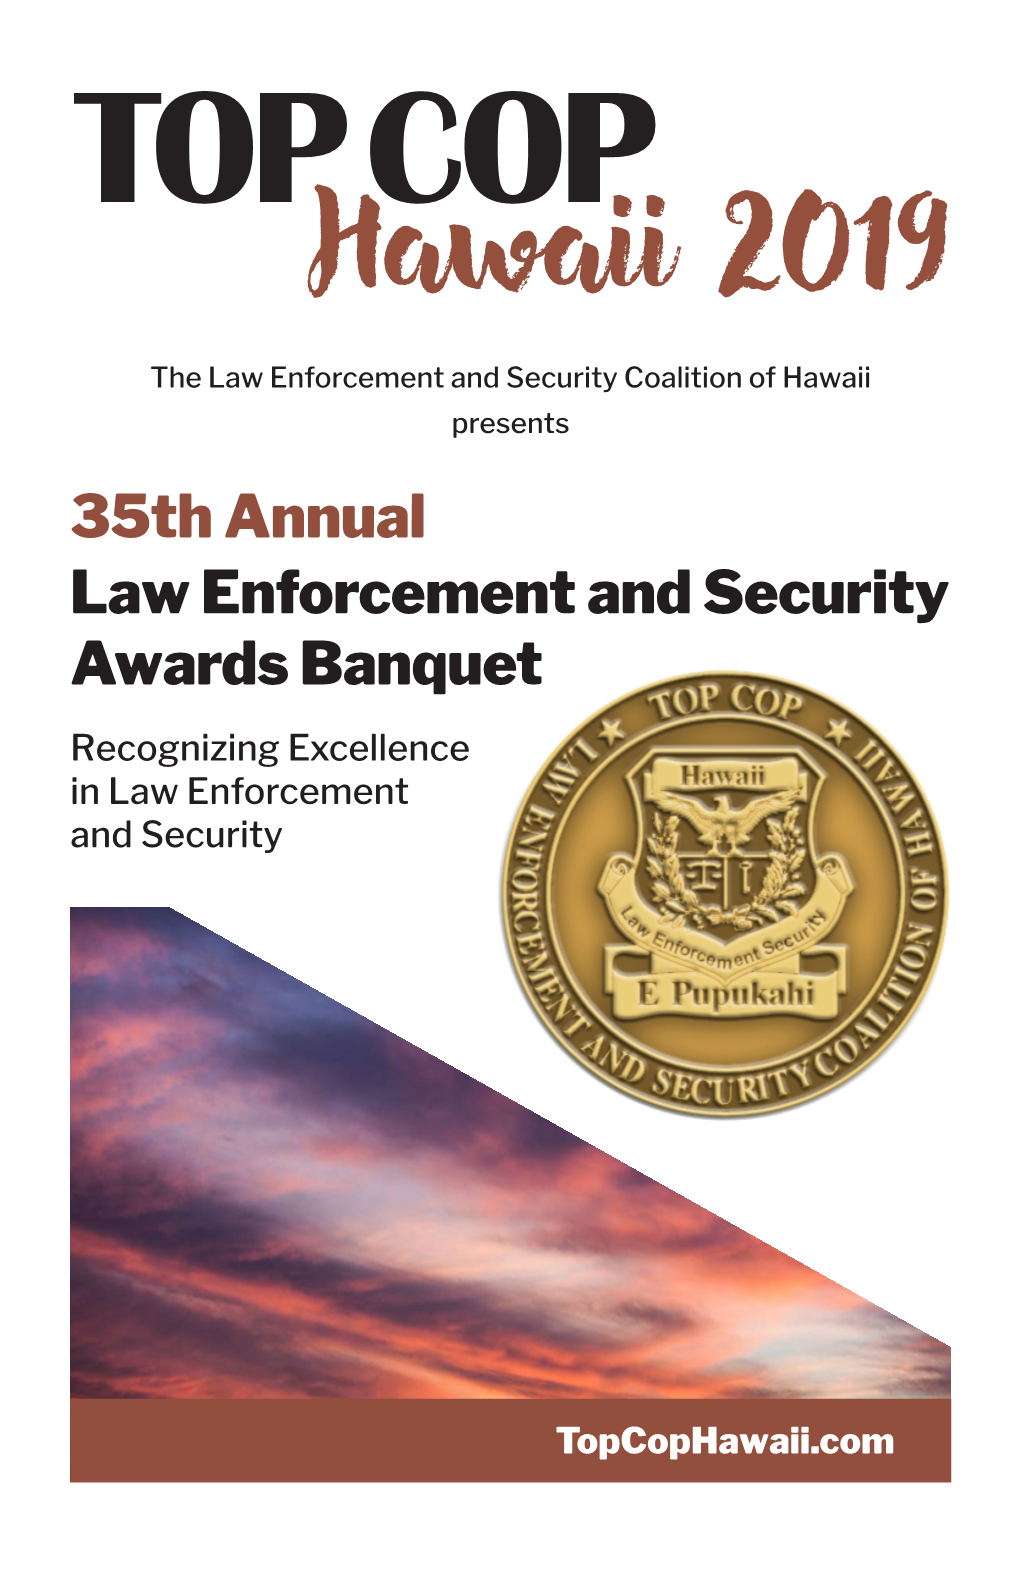 Law Enforcement and Security Awards Banquet Recognizing Excellence in Law Enforcement and Security